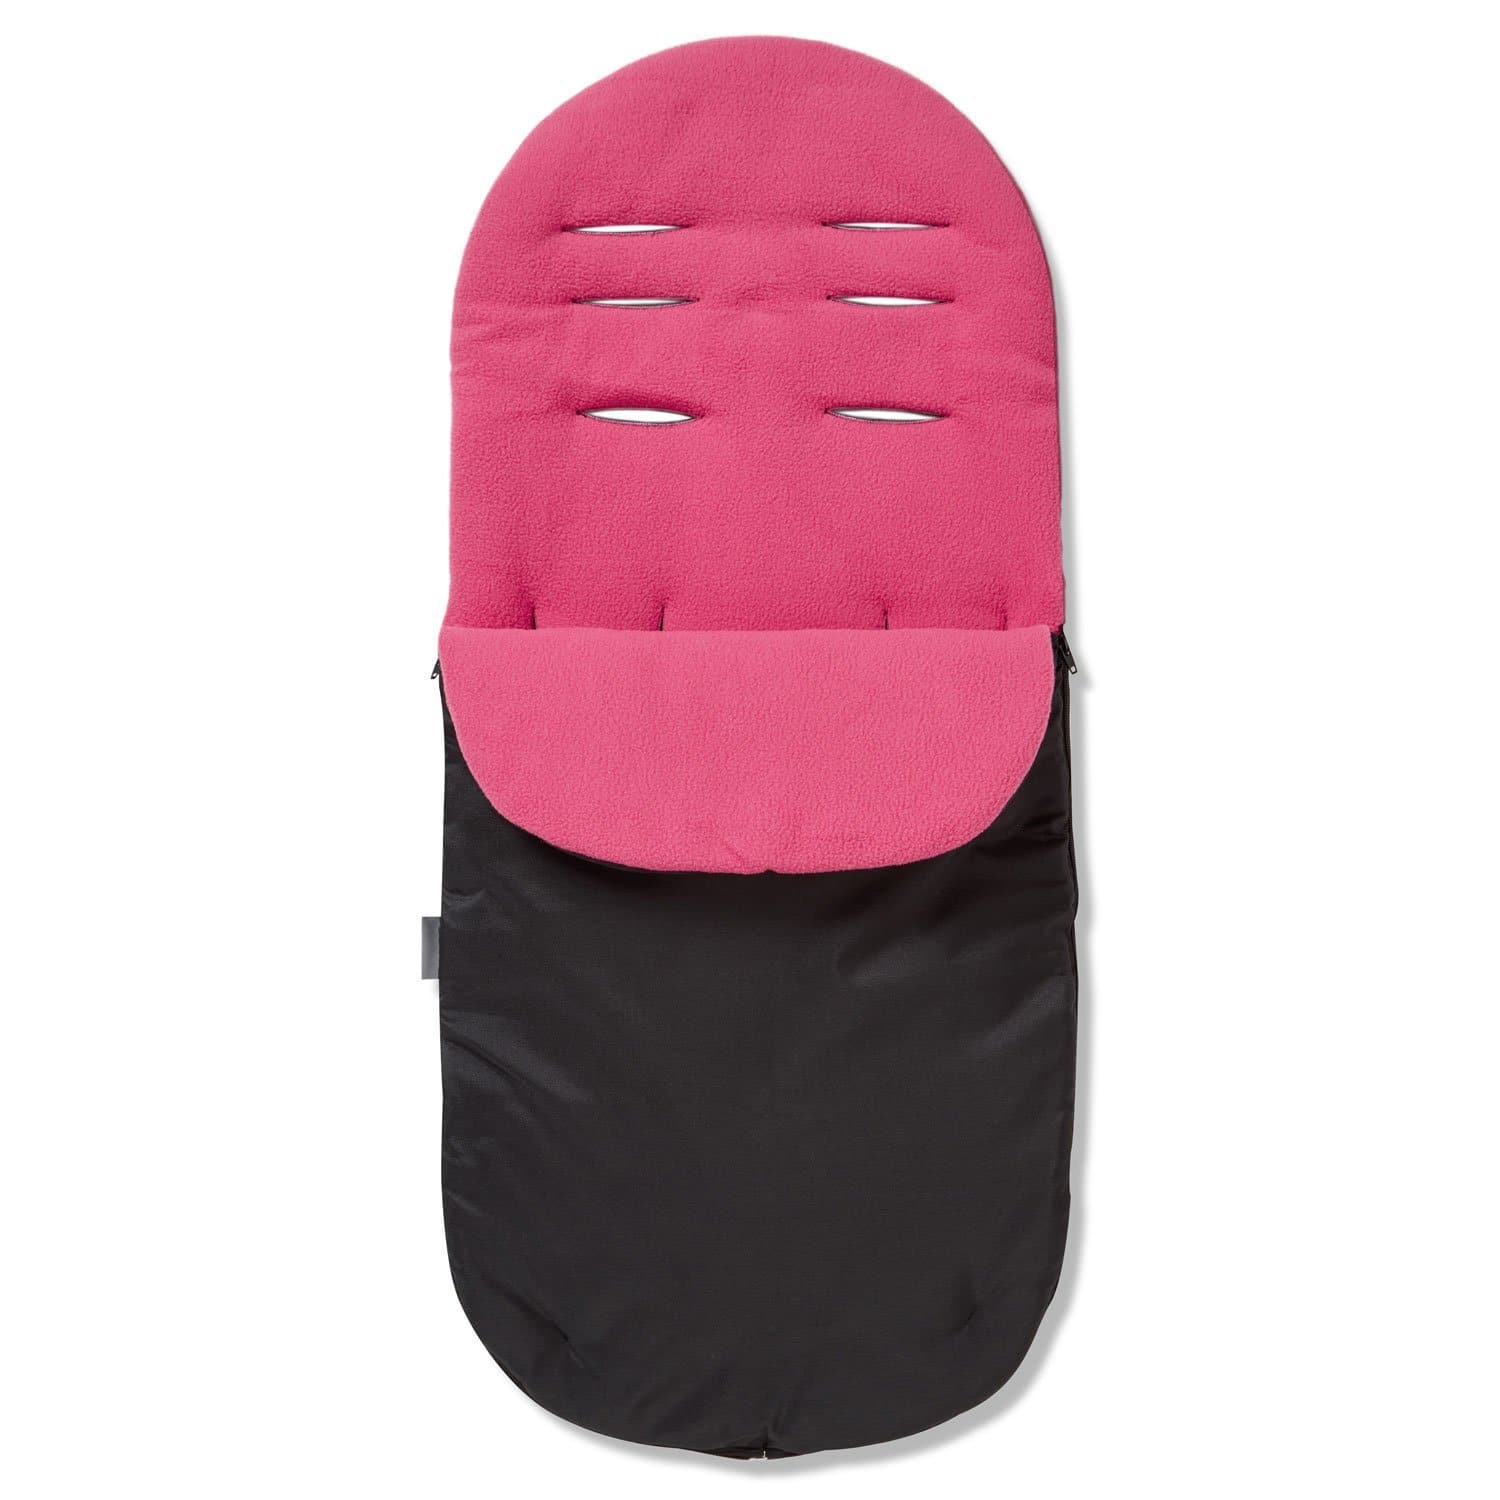 Footmuff / Cosy Toes Compatible with Jane - For Your Little One